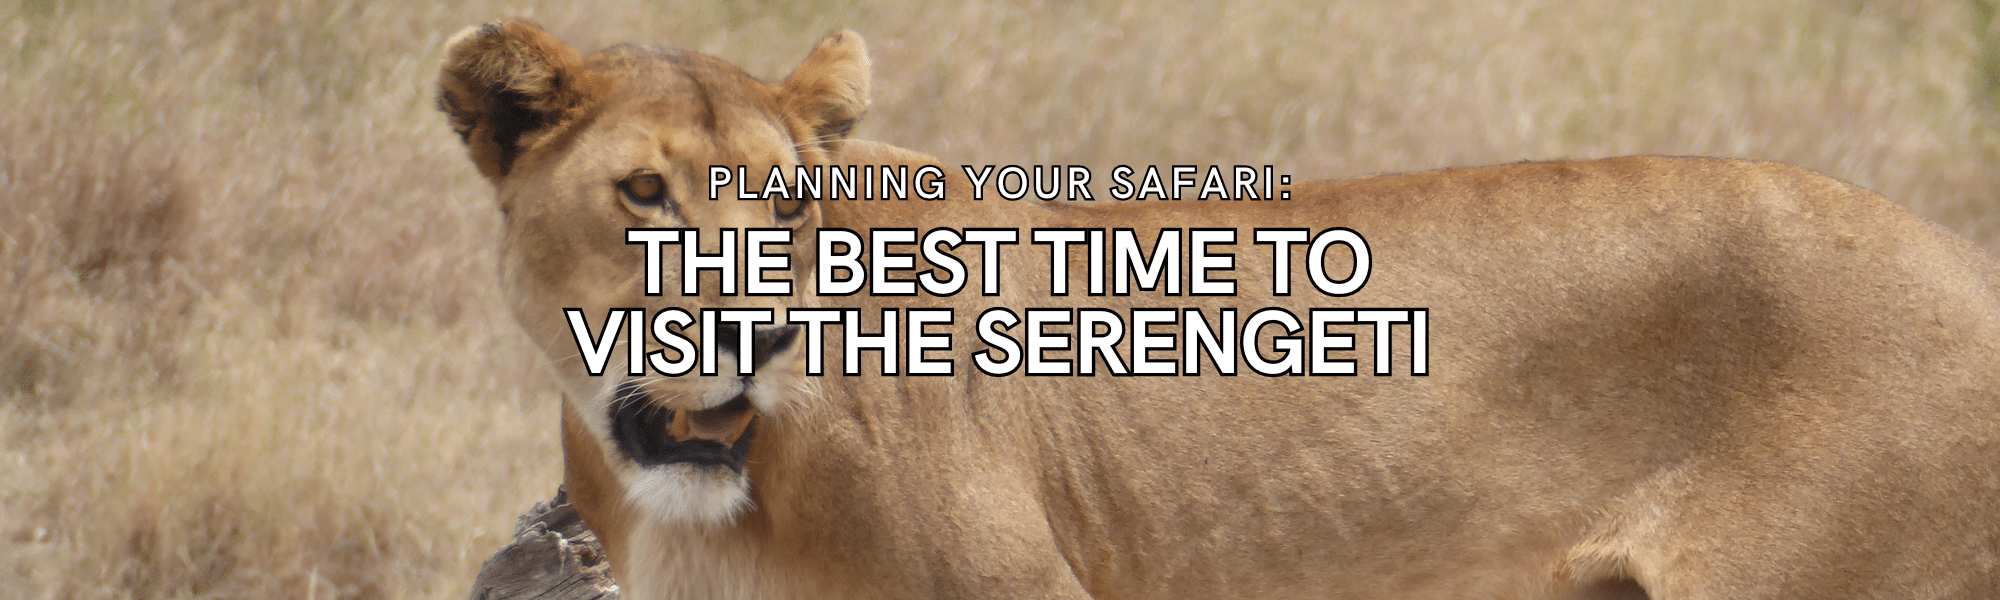 Best Time to Visit the Serengeti